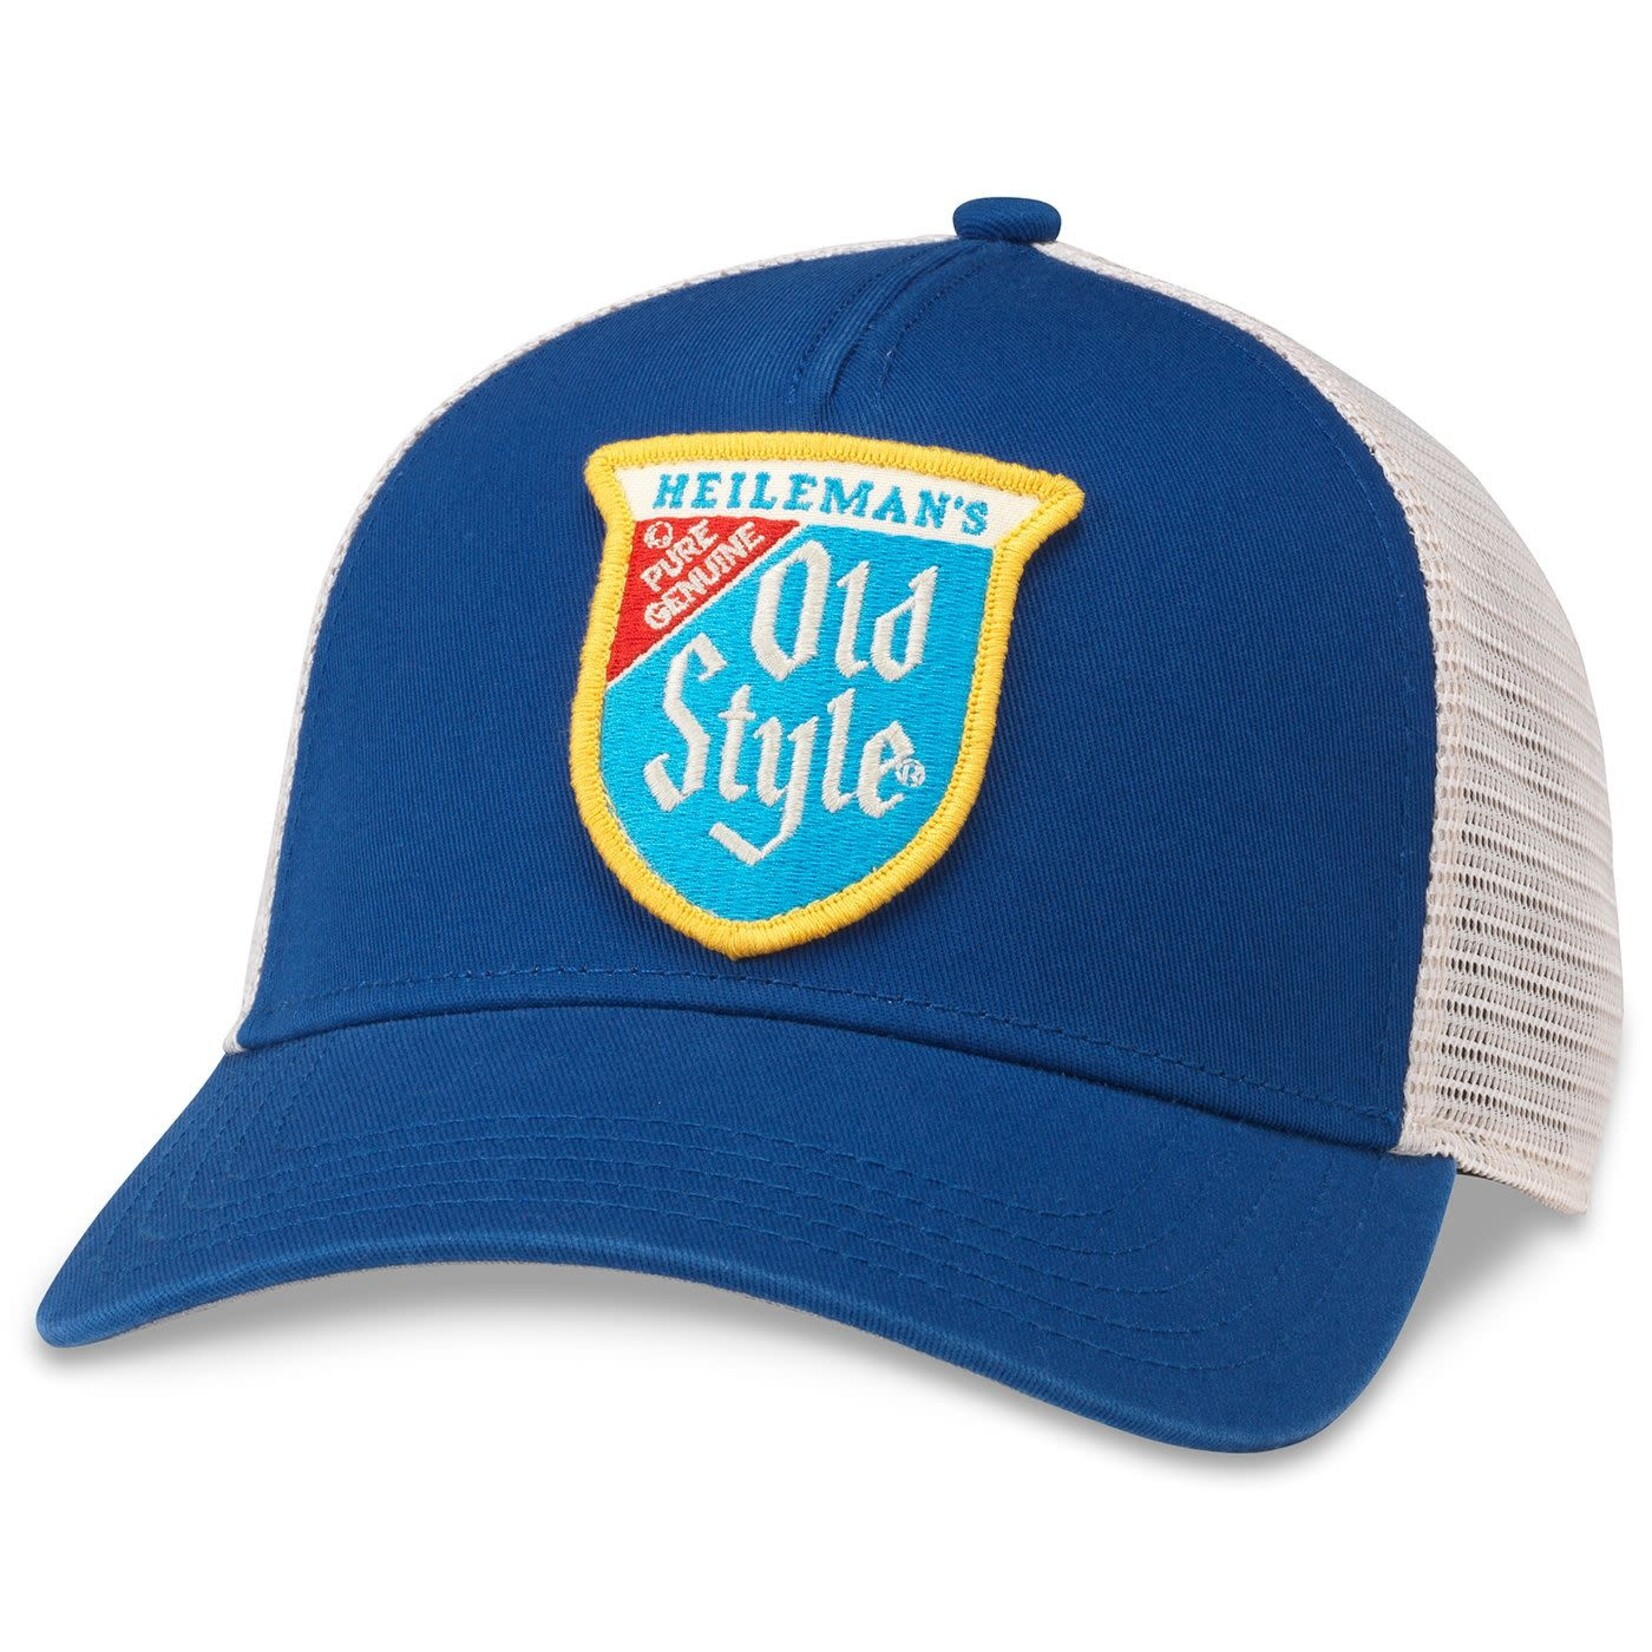 American Needle Old Style Patch Royal Blue Ball Cap